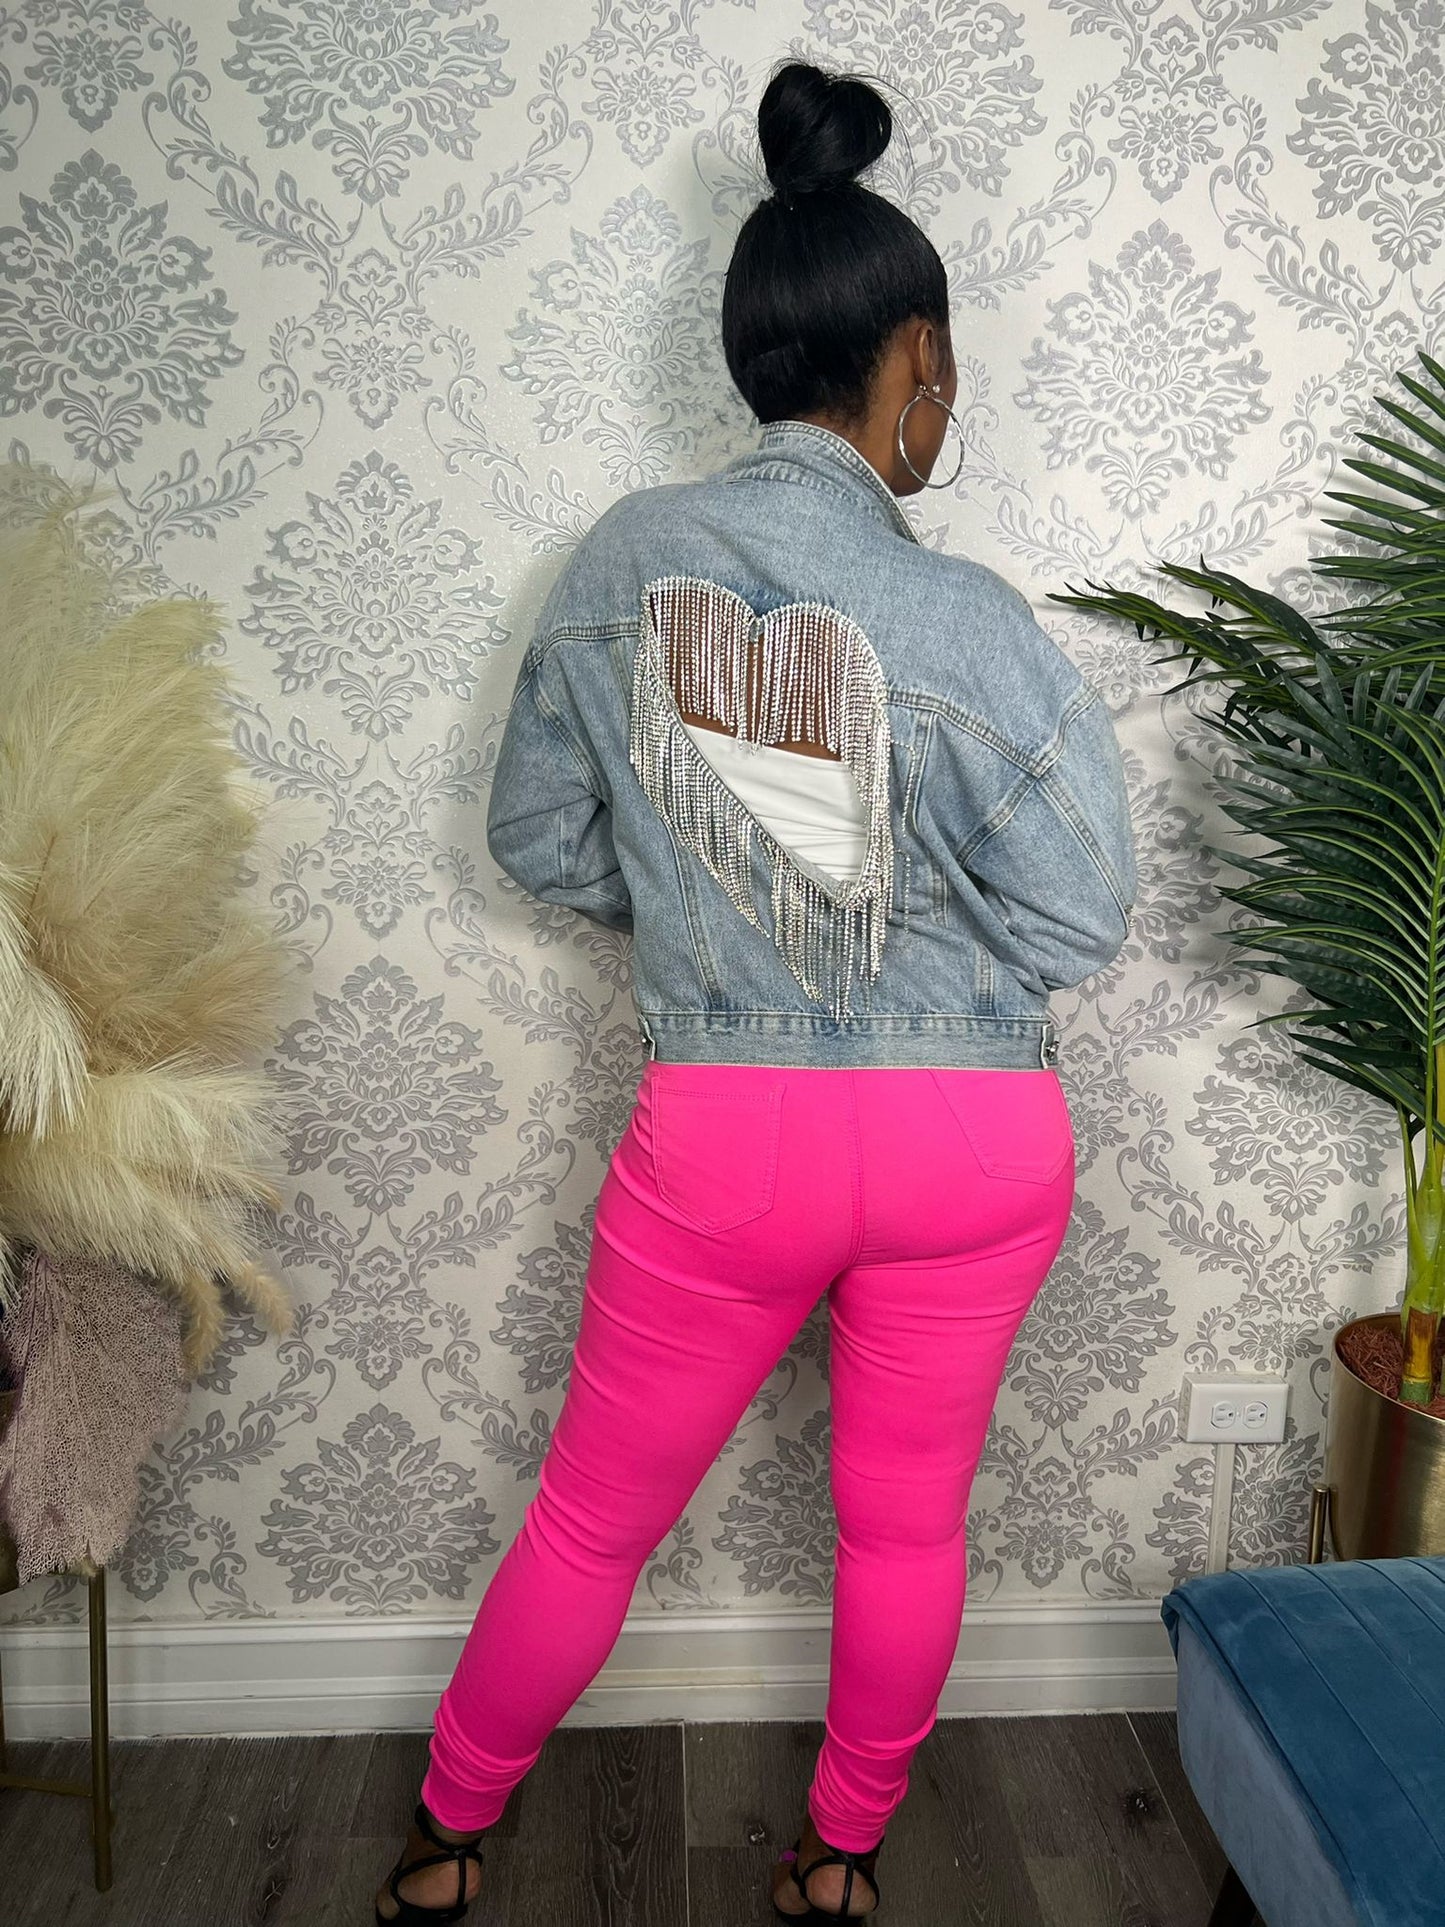 THE BARBIE JEANS